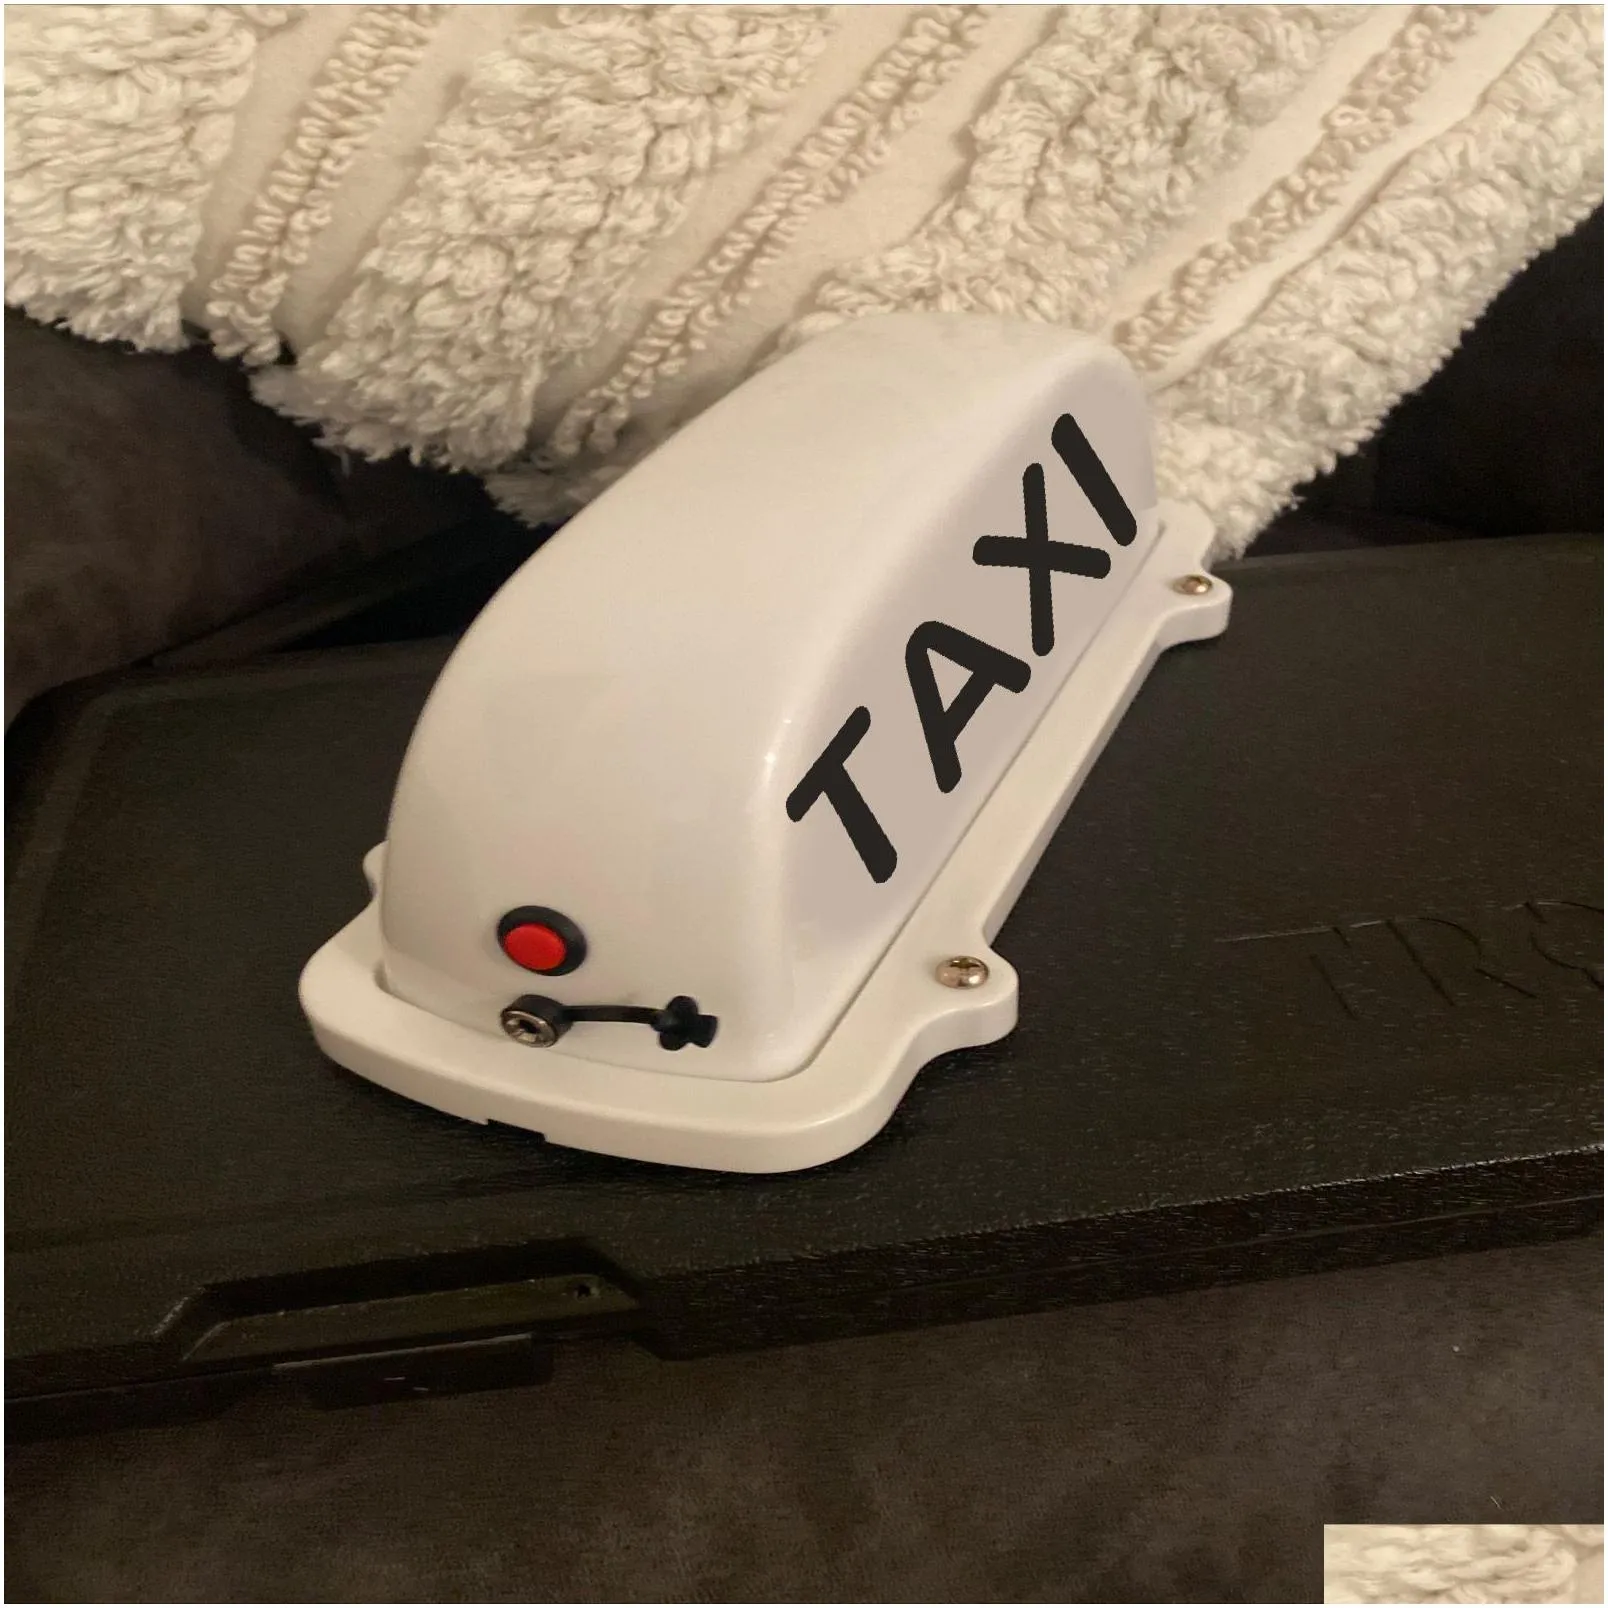 TAXI Cab Top Roof Sign USB Rechargeable Battery with Magnetic Base Waterproof Cab Indicator Sign Lamp Windshield WHITE NEW